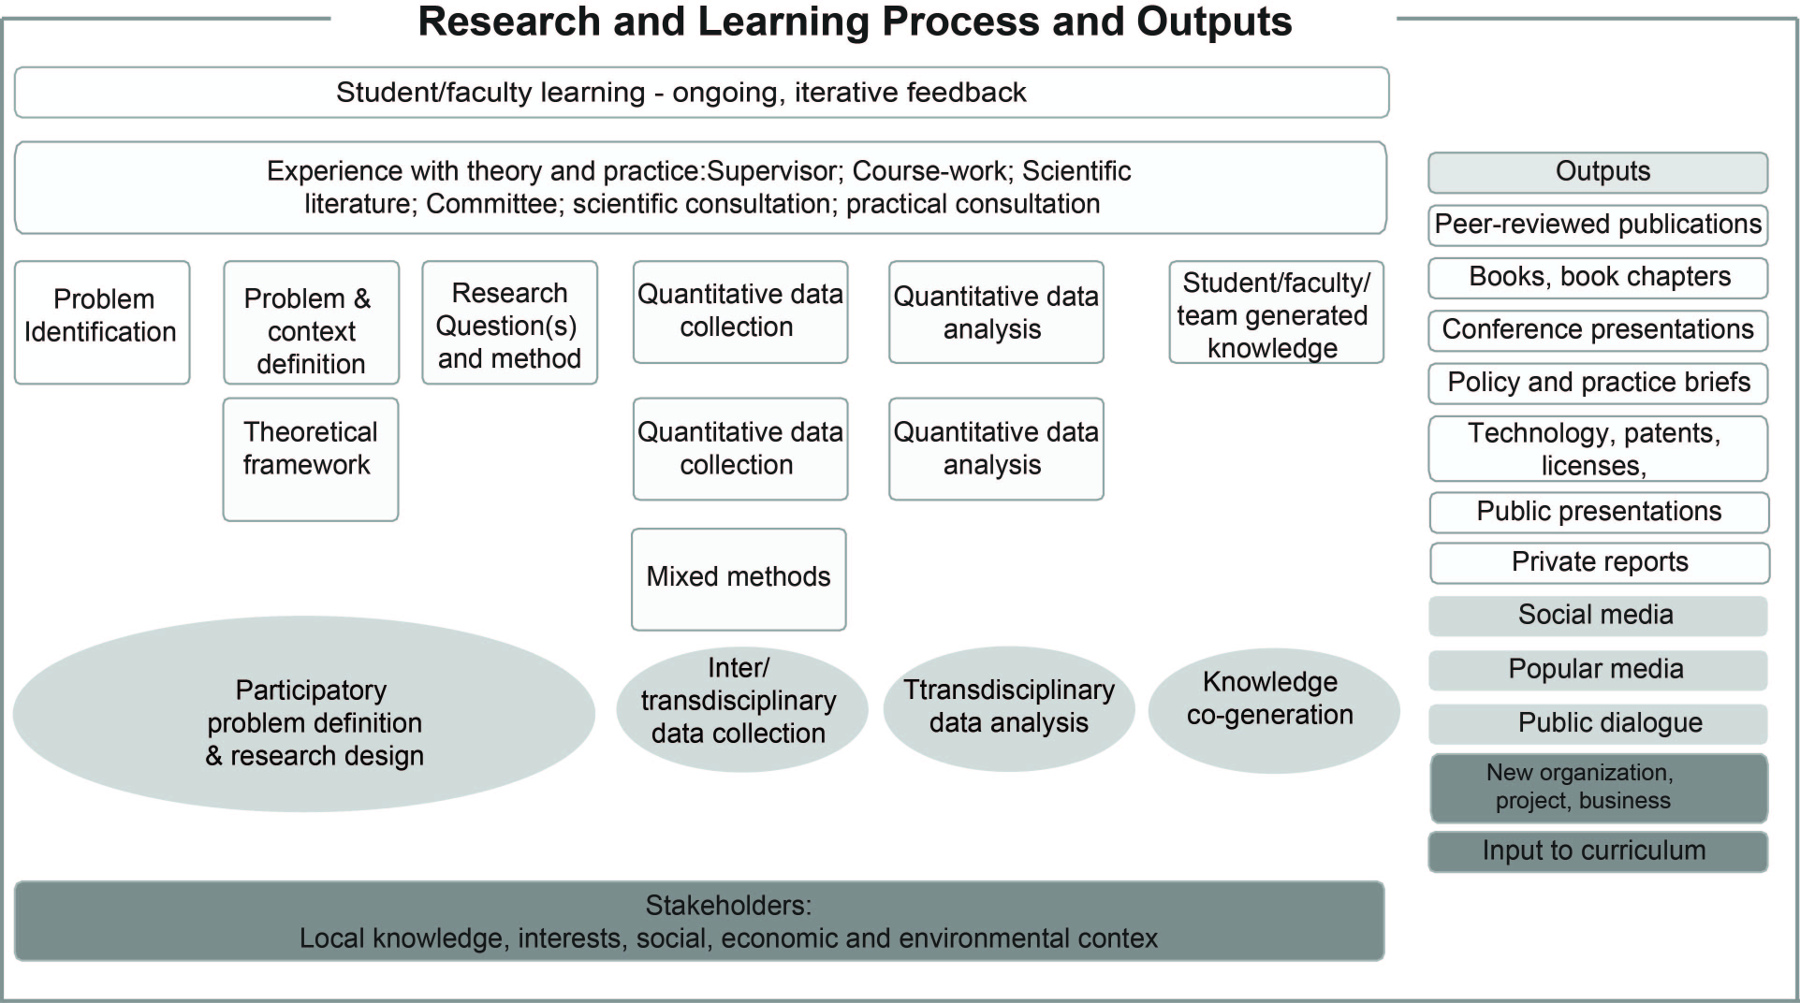 Figure 3. RRU Research and Learning Process.